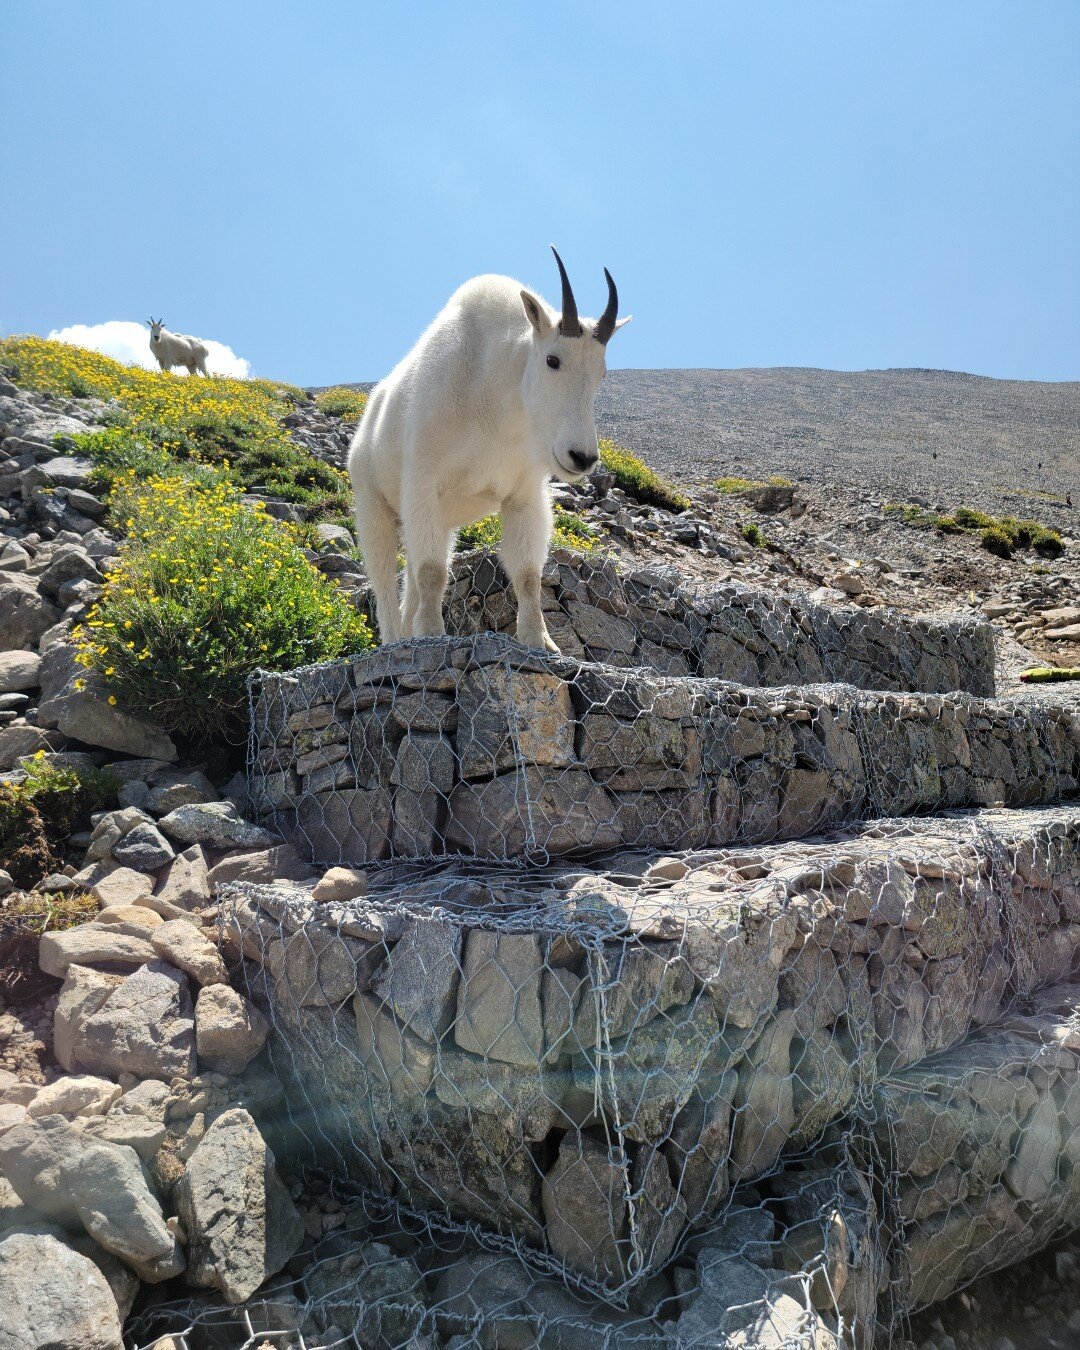 &quot;You might think that climbing a mountain is half the battle, only to find out that the mountain goats who live at the top are vicious, and heavily armed.&quot; - Lemony Snicket

#hiking #backpacking #mountains #outdoors #explore #goats